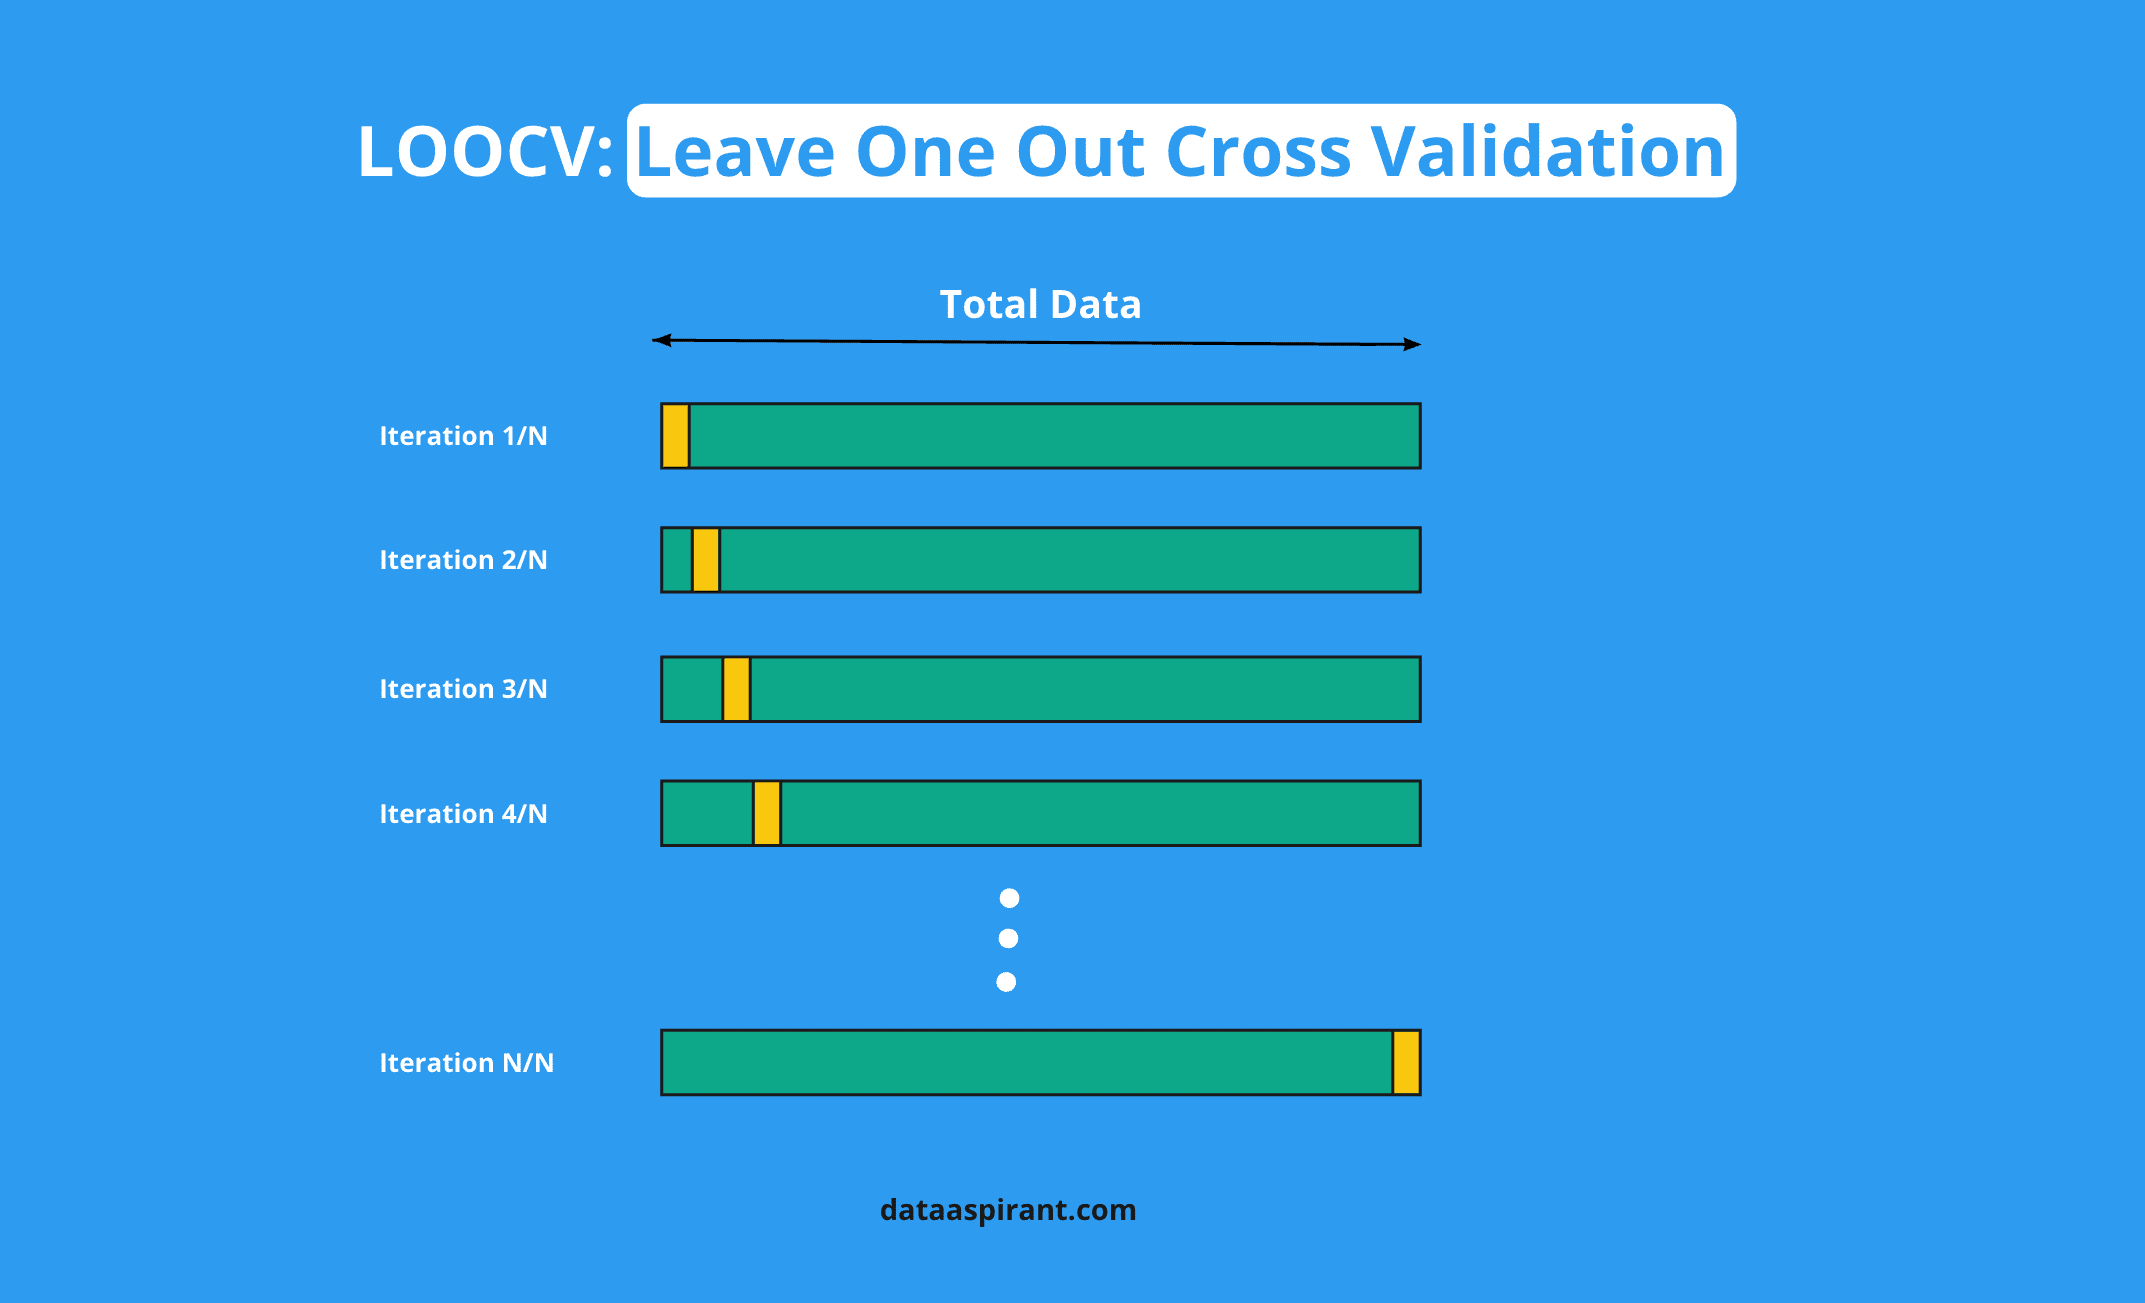 Leave-One-Out Cross Validation
(LOOCV): A Comprehensive Guide to Improve Model Performance